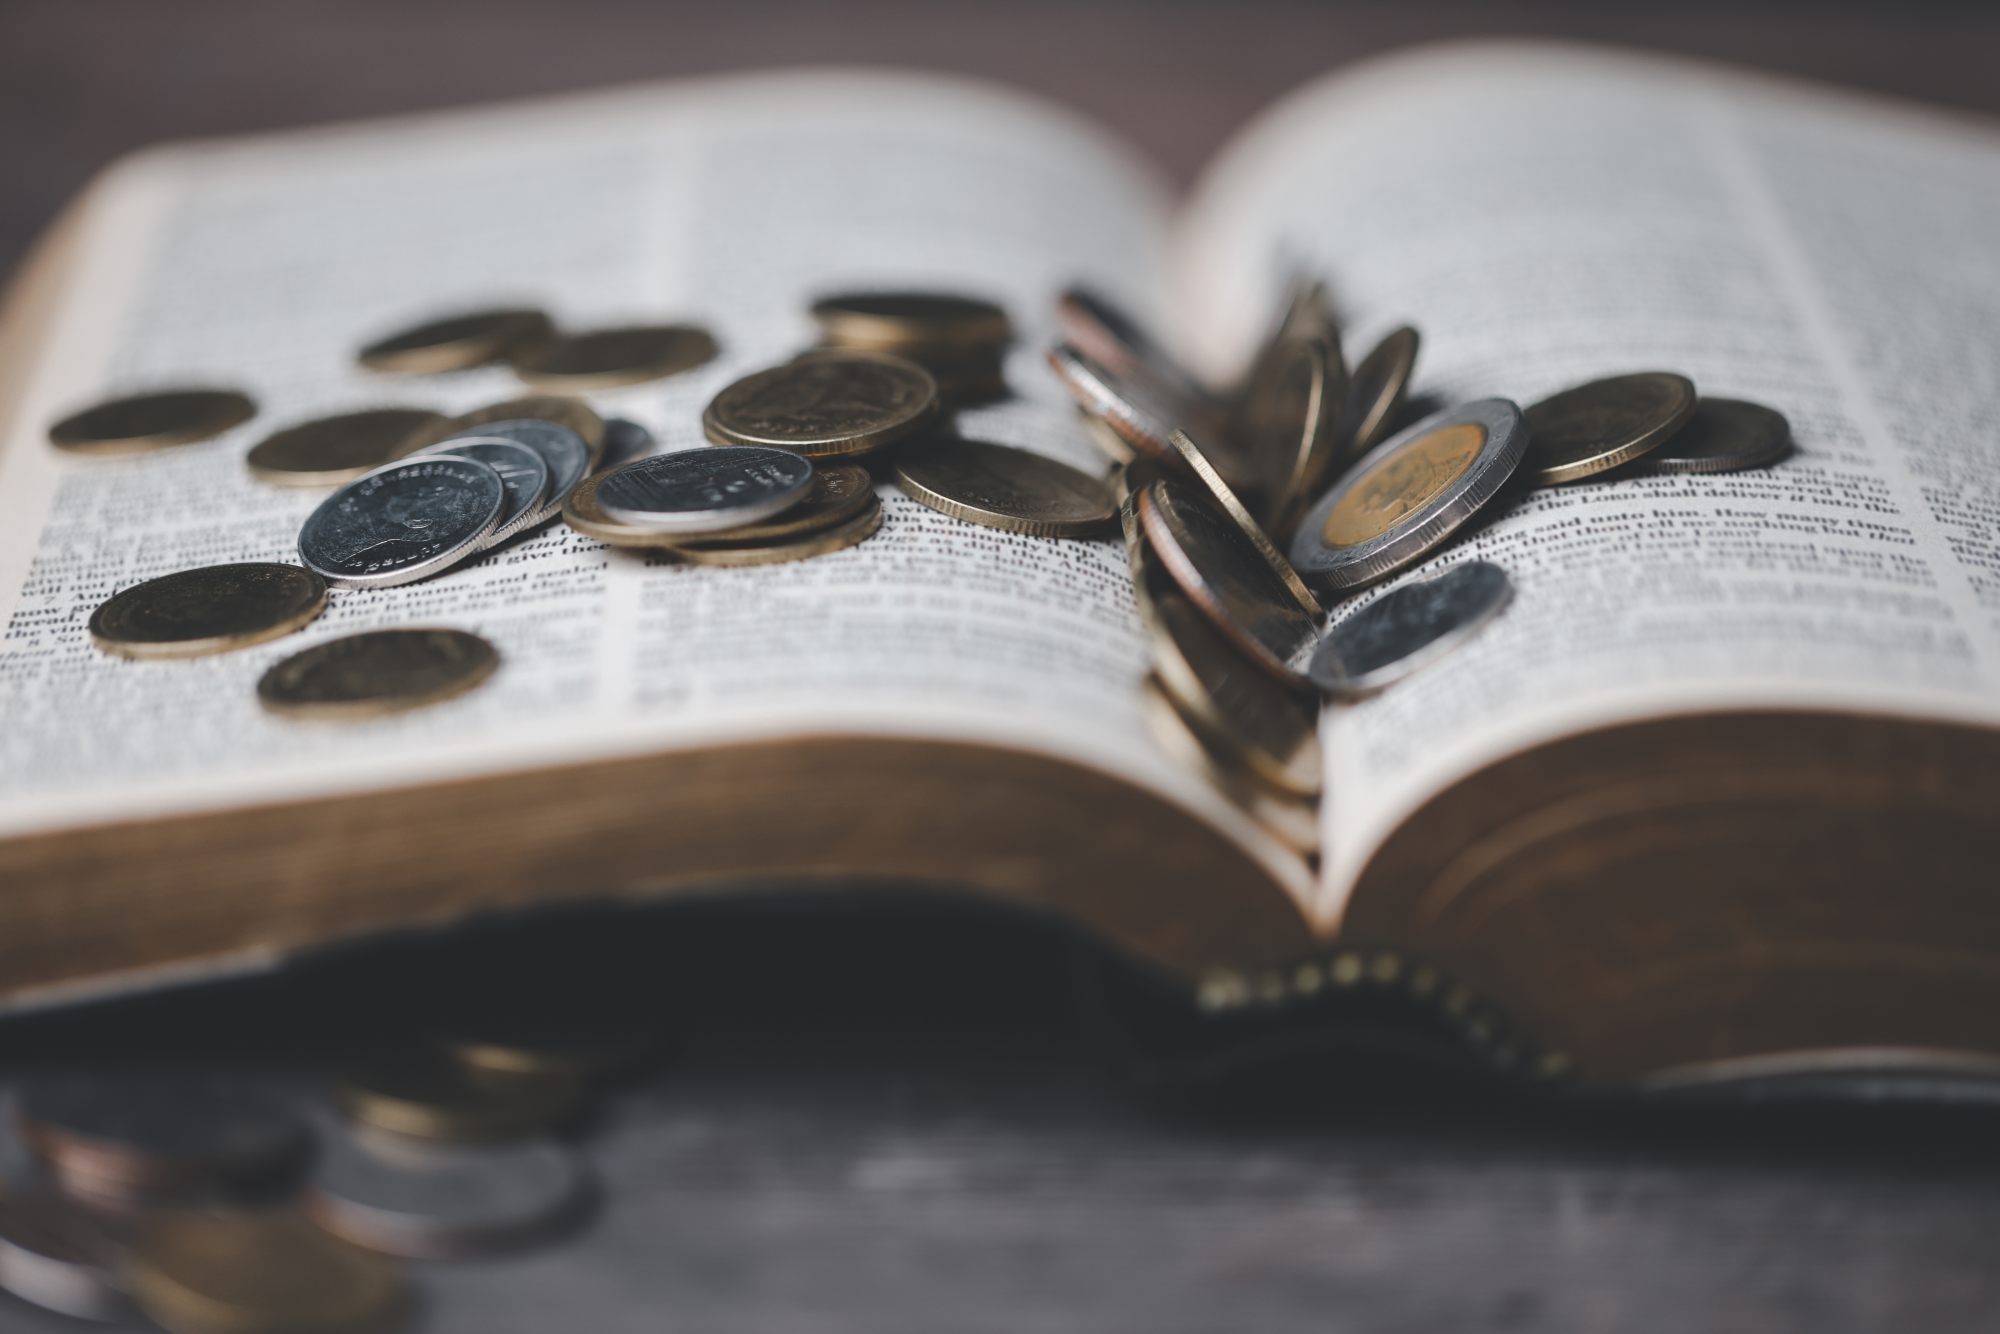 Is your trust in God or money? - post